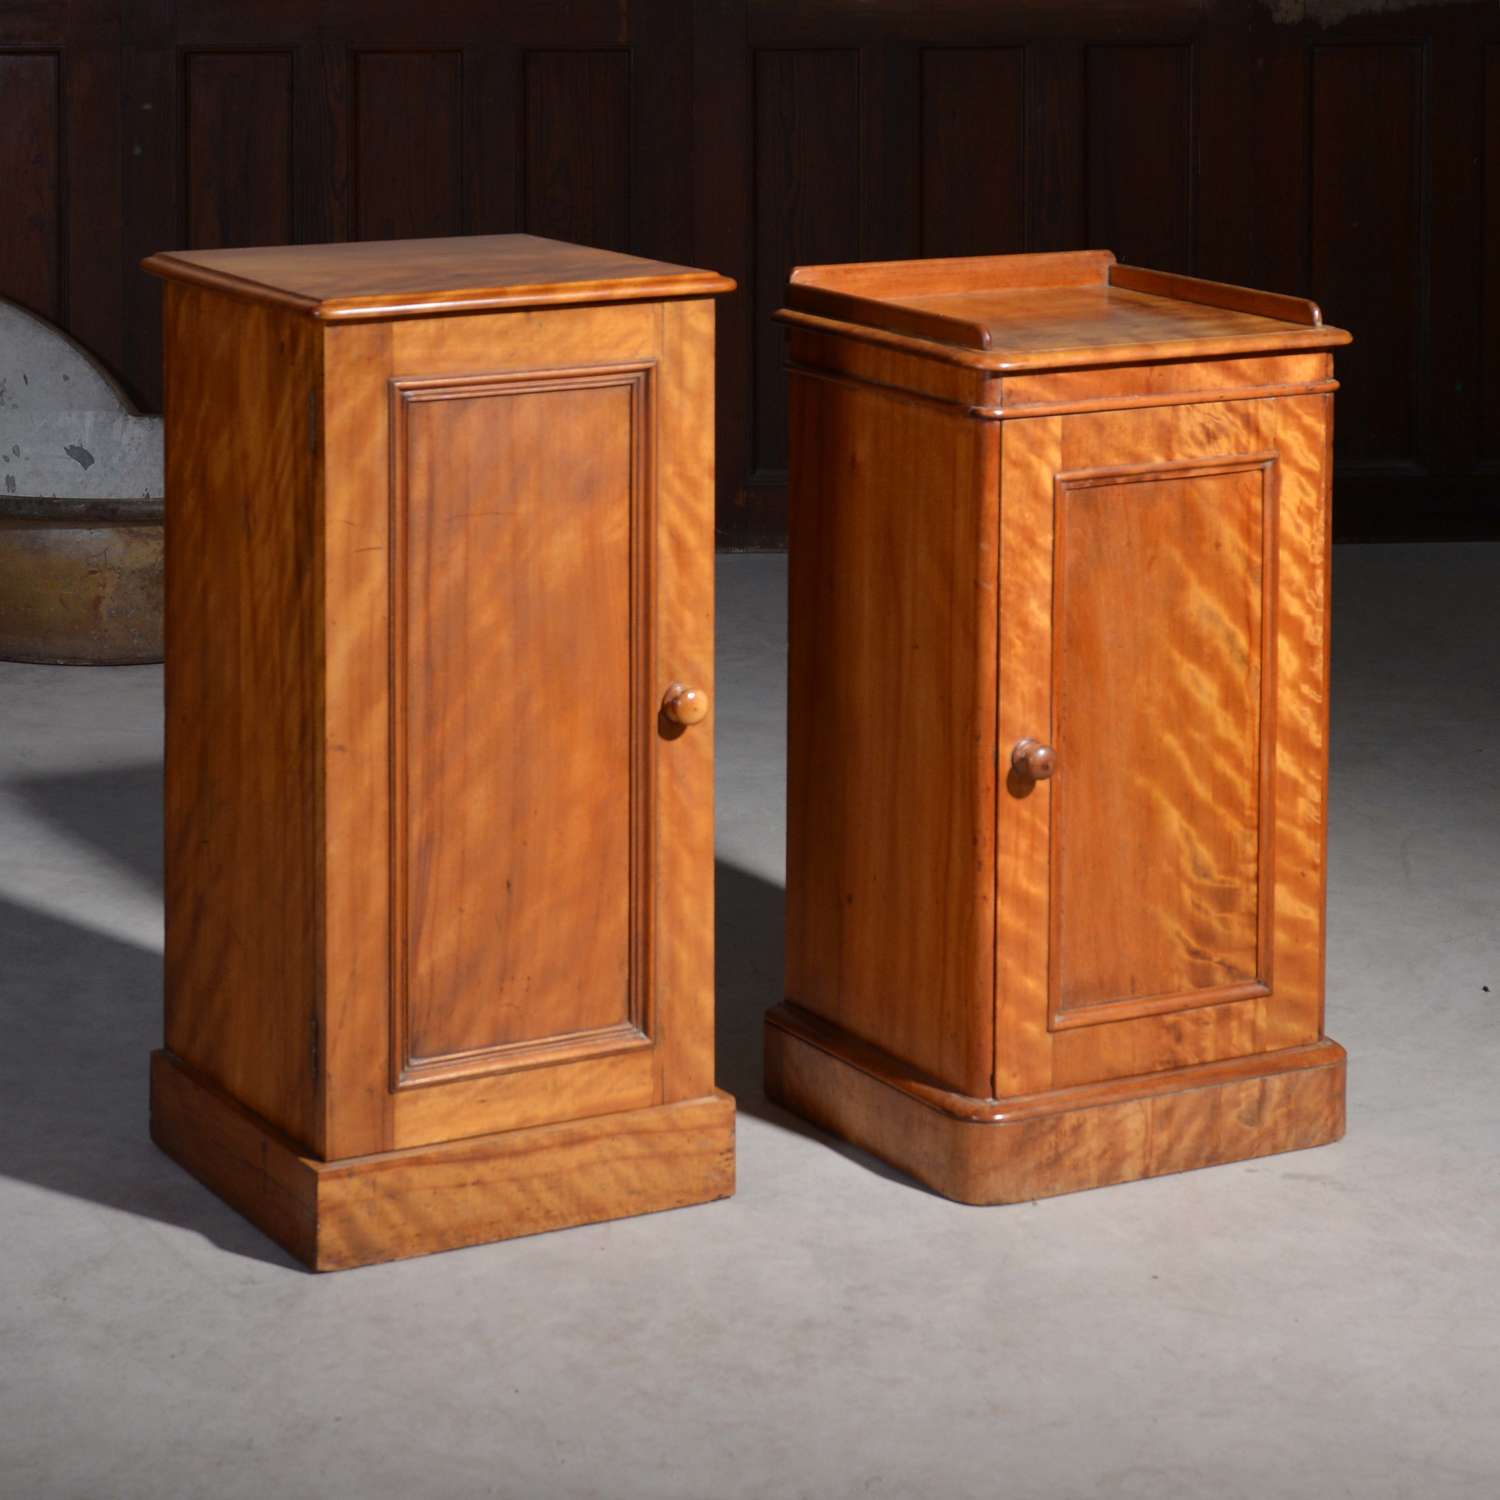 Near Pair of Satin Birch Bedside Cabinets